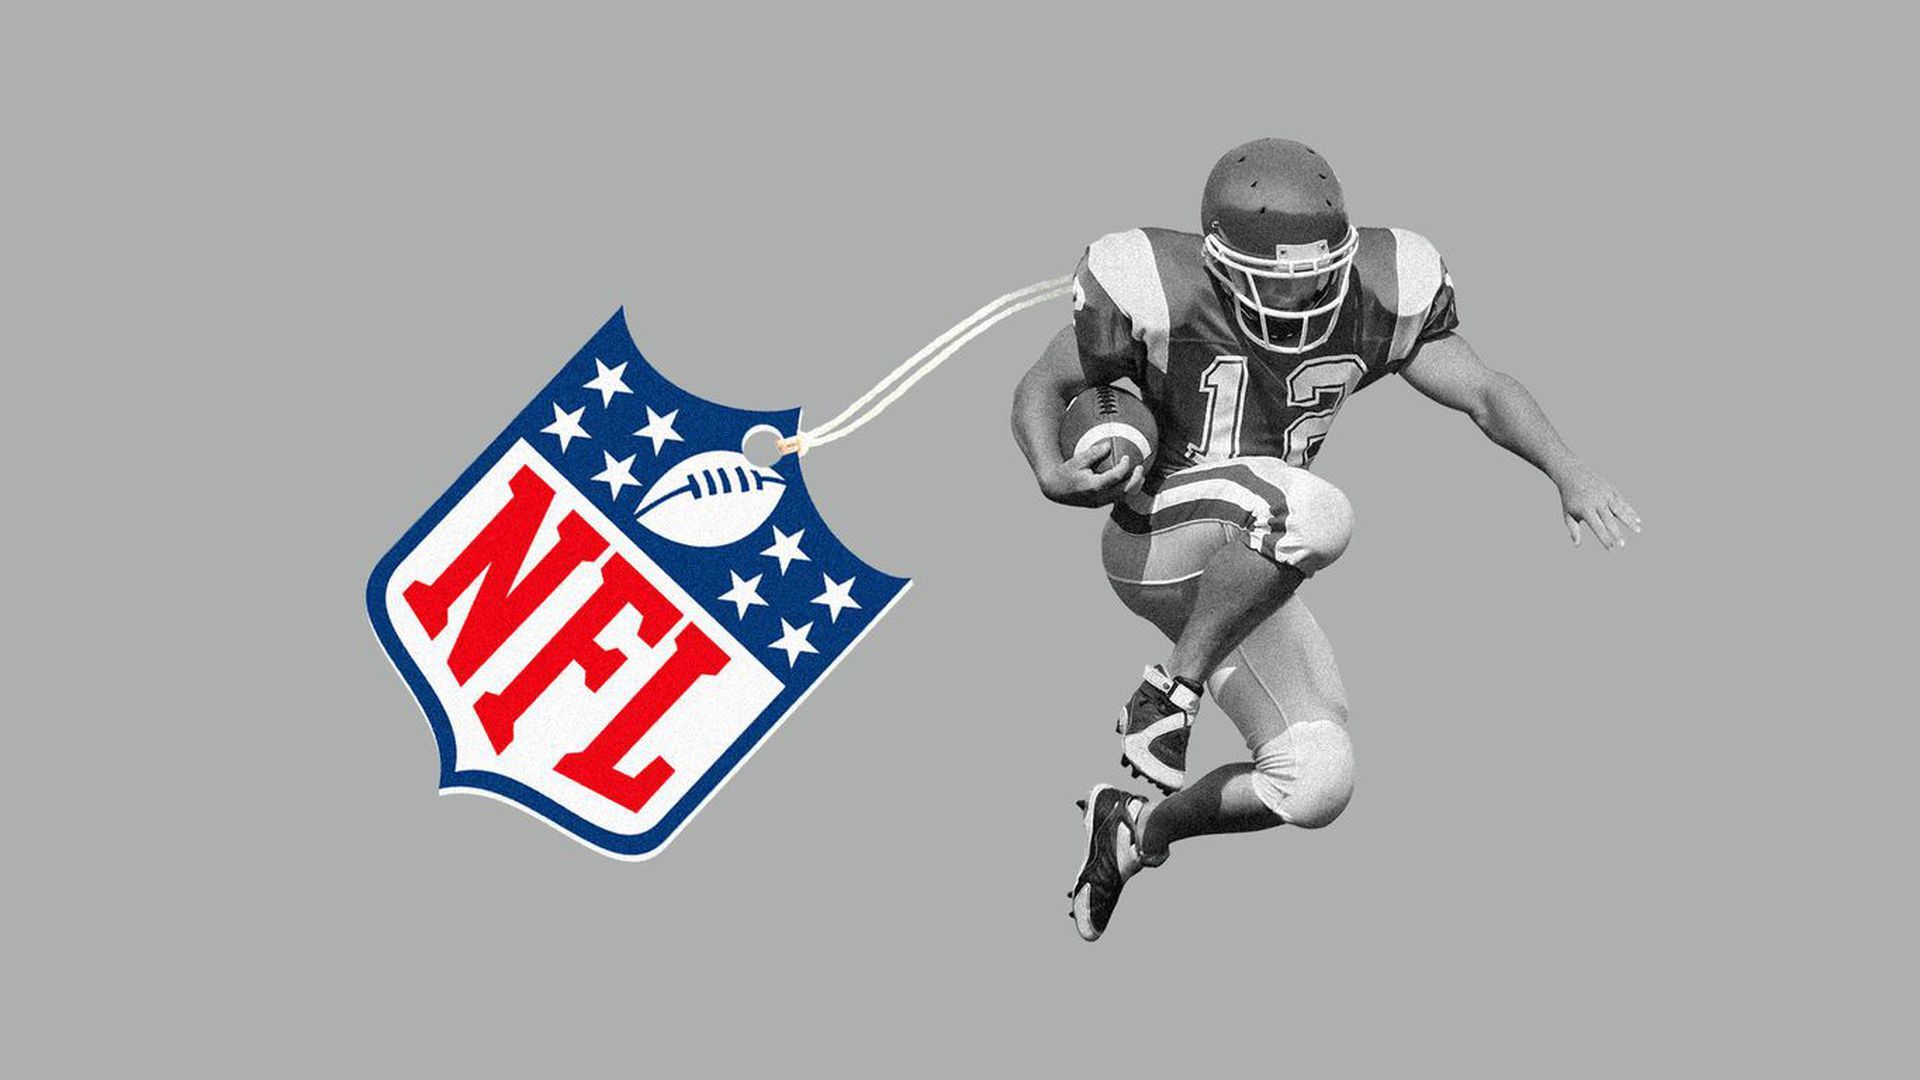 what channel are the nfl games on today on directv